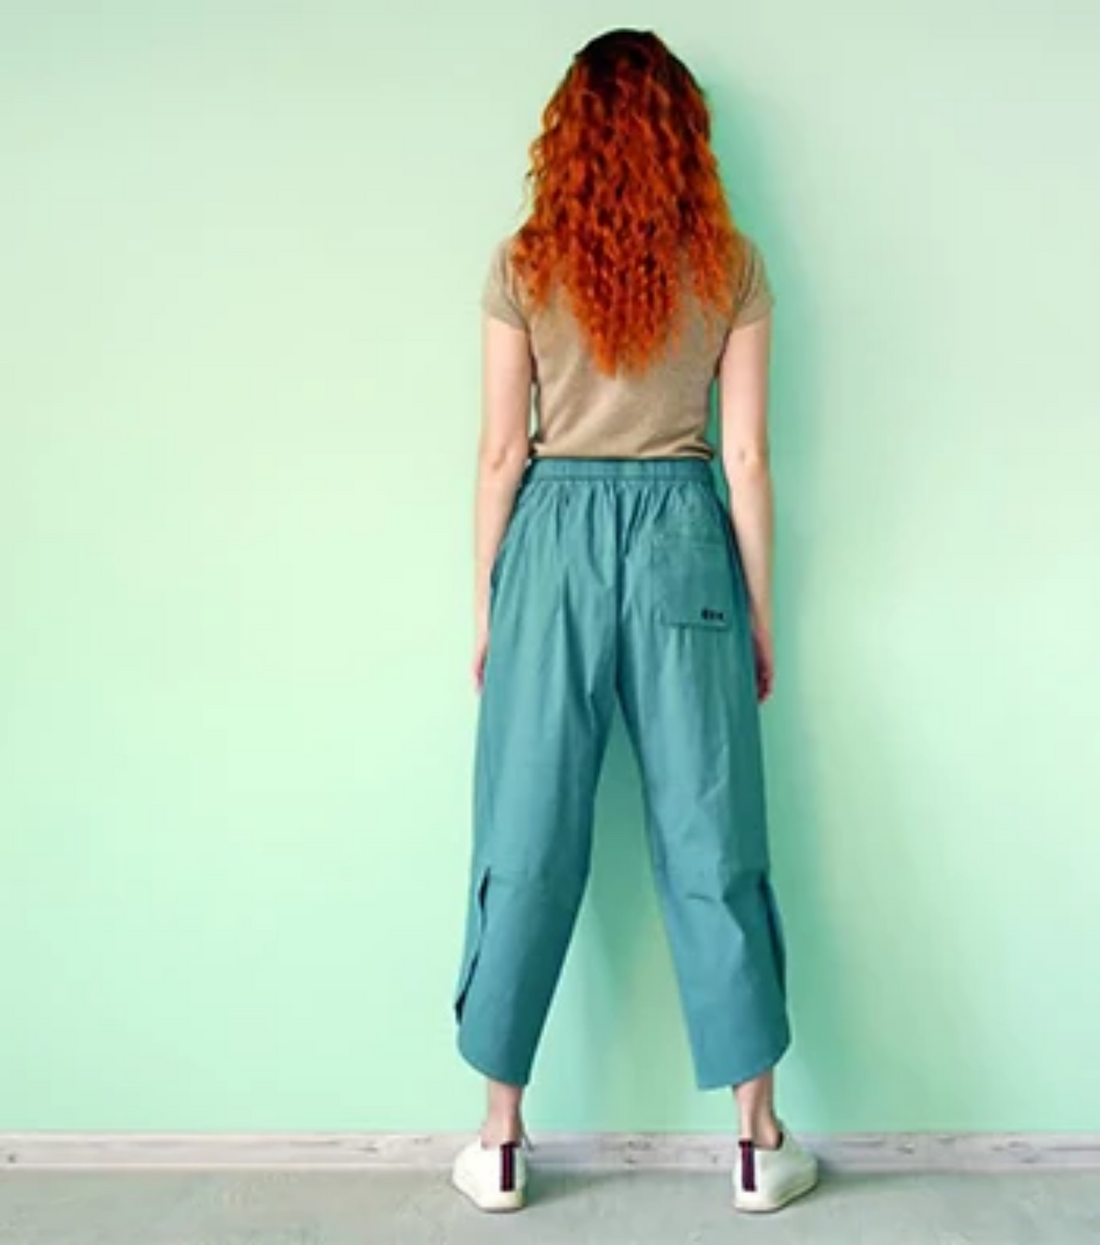 Women's Summer Casual Cotton Pants With Pockets